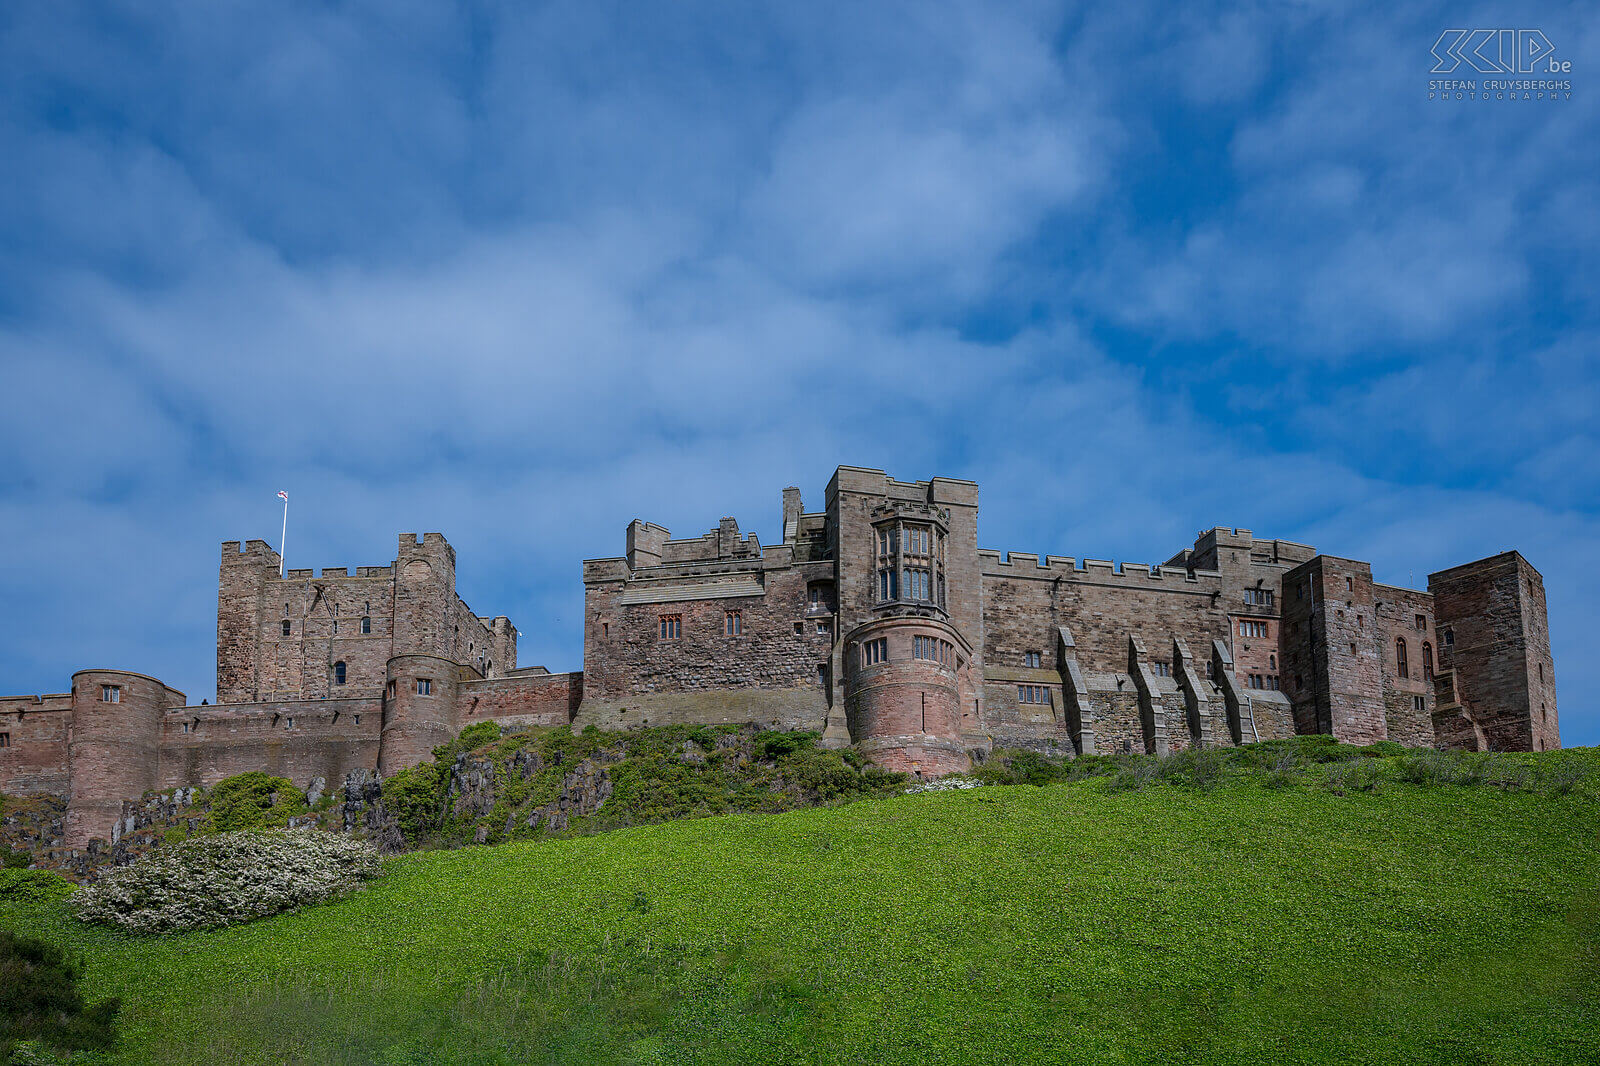 Bamburgh Castle Bamburgh Castle is an impressive twelfth-century castle located on the seafront in Bamburgh near Seahouses on the English Northumberland coast. The castle has also been featured in numerous television programs and films and the series The Last Kingdom. Stefan Cruysberghs